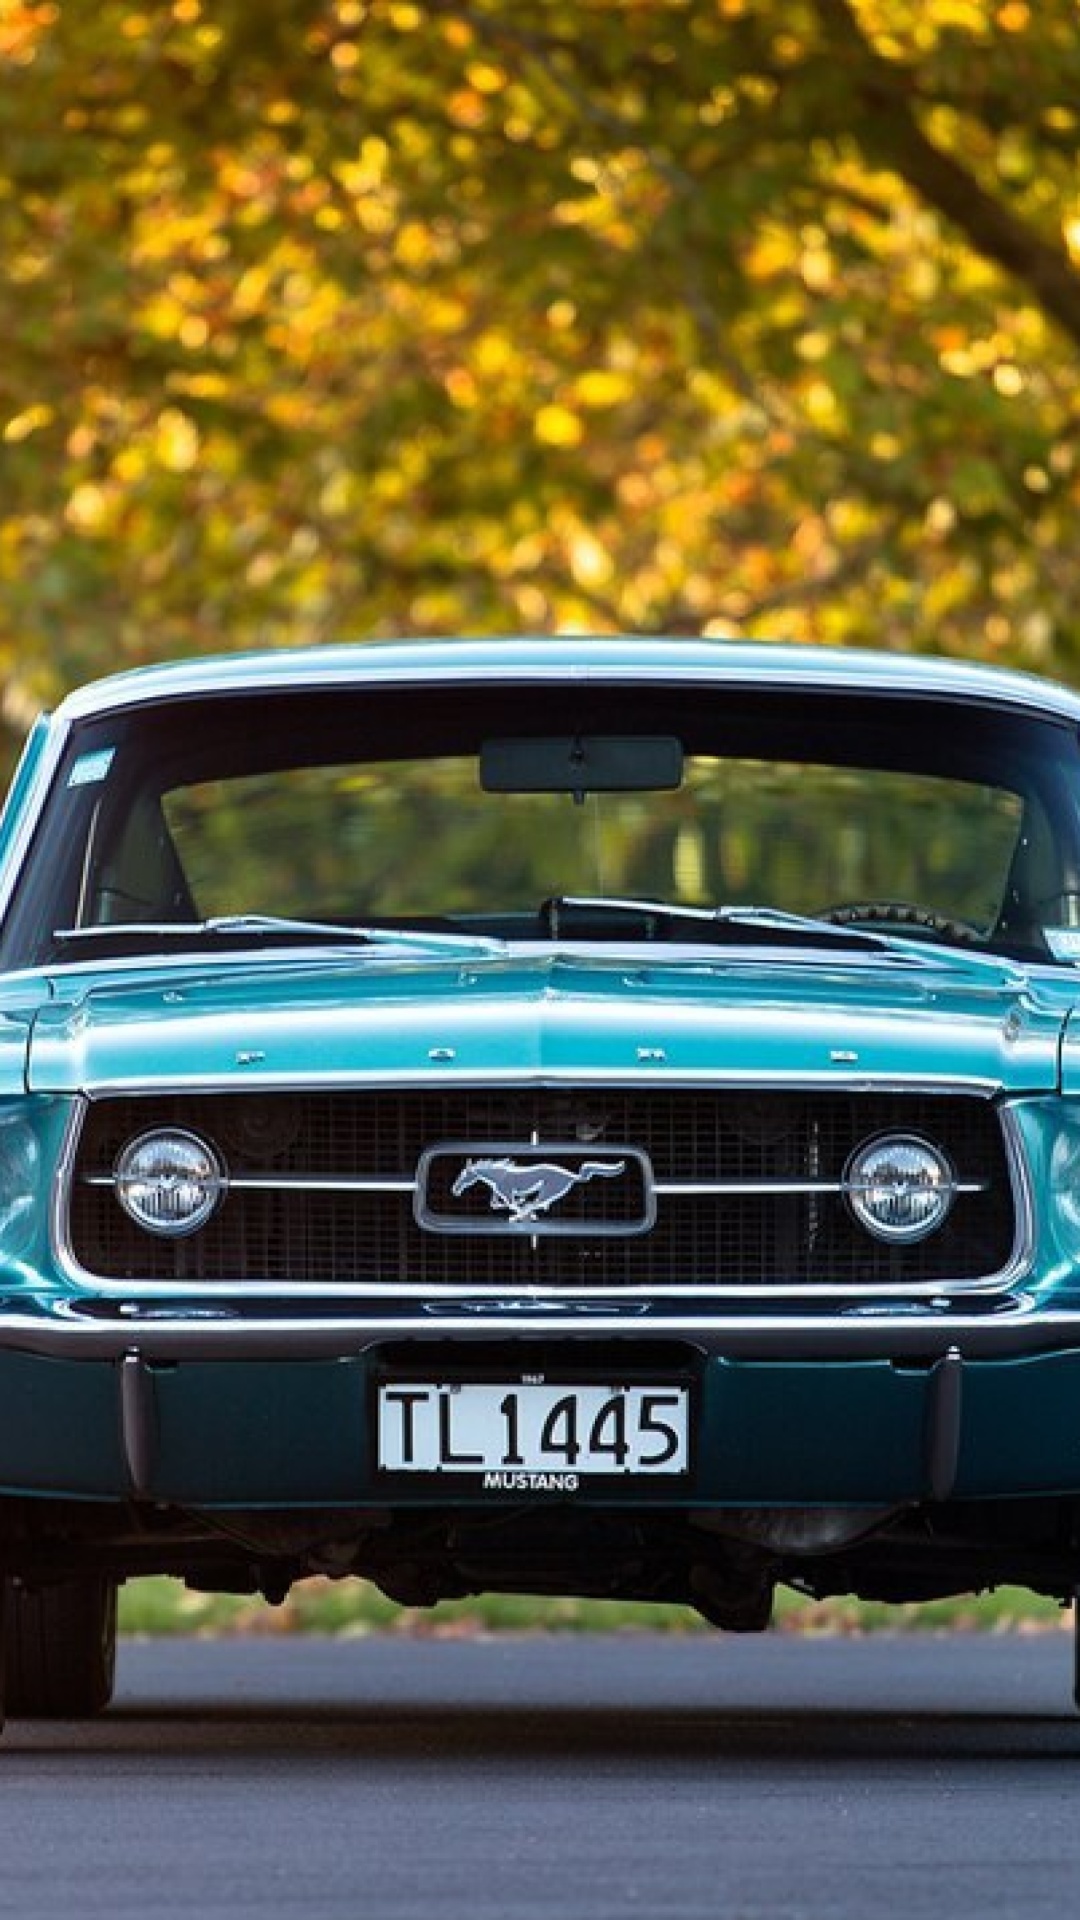 Ford Mustang First Generation wallpaper 1080x1920